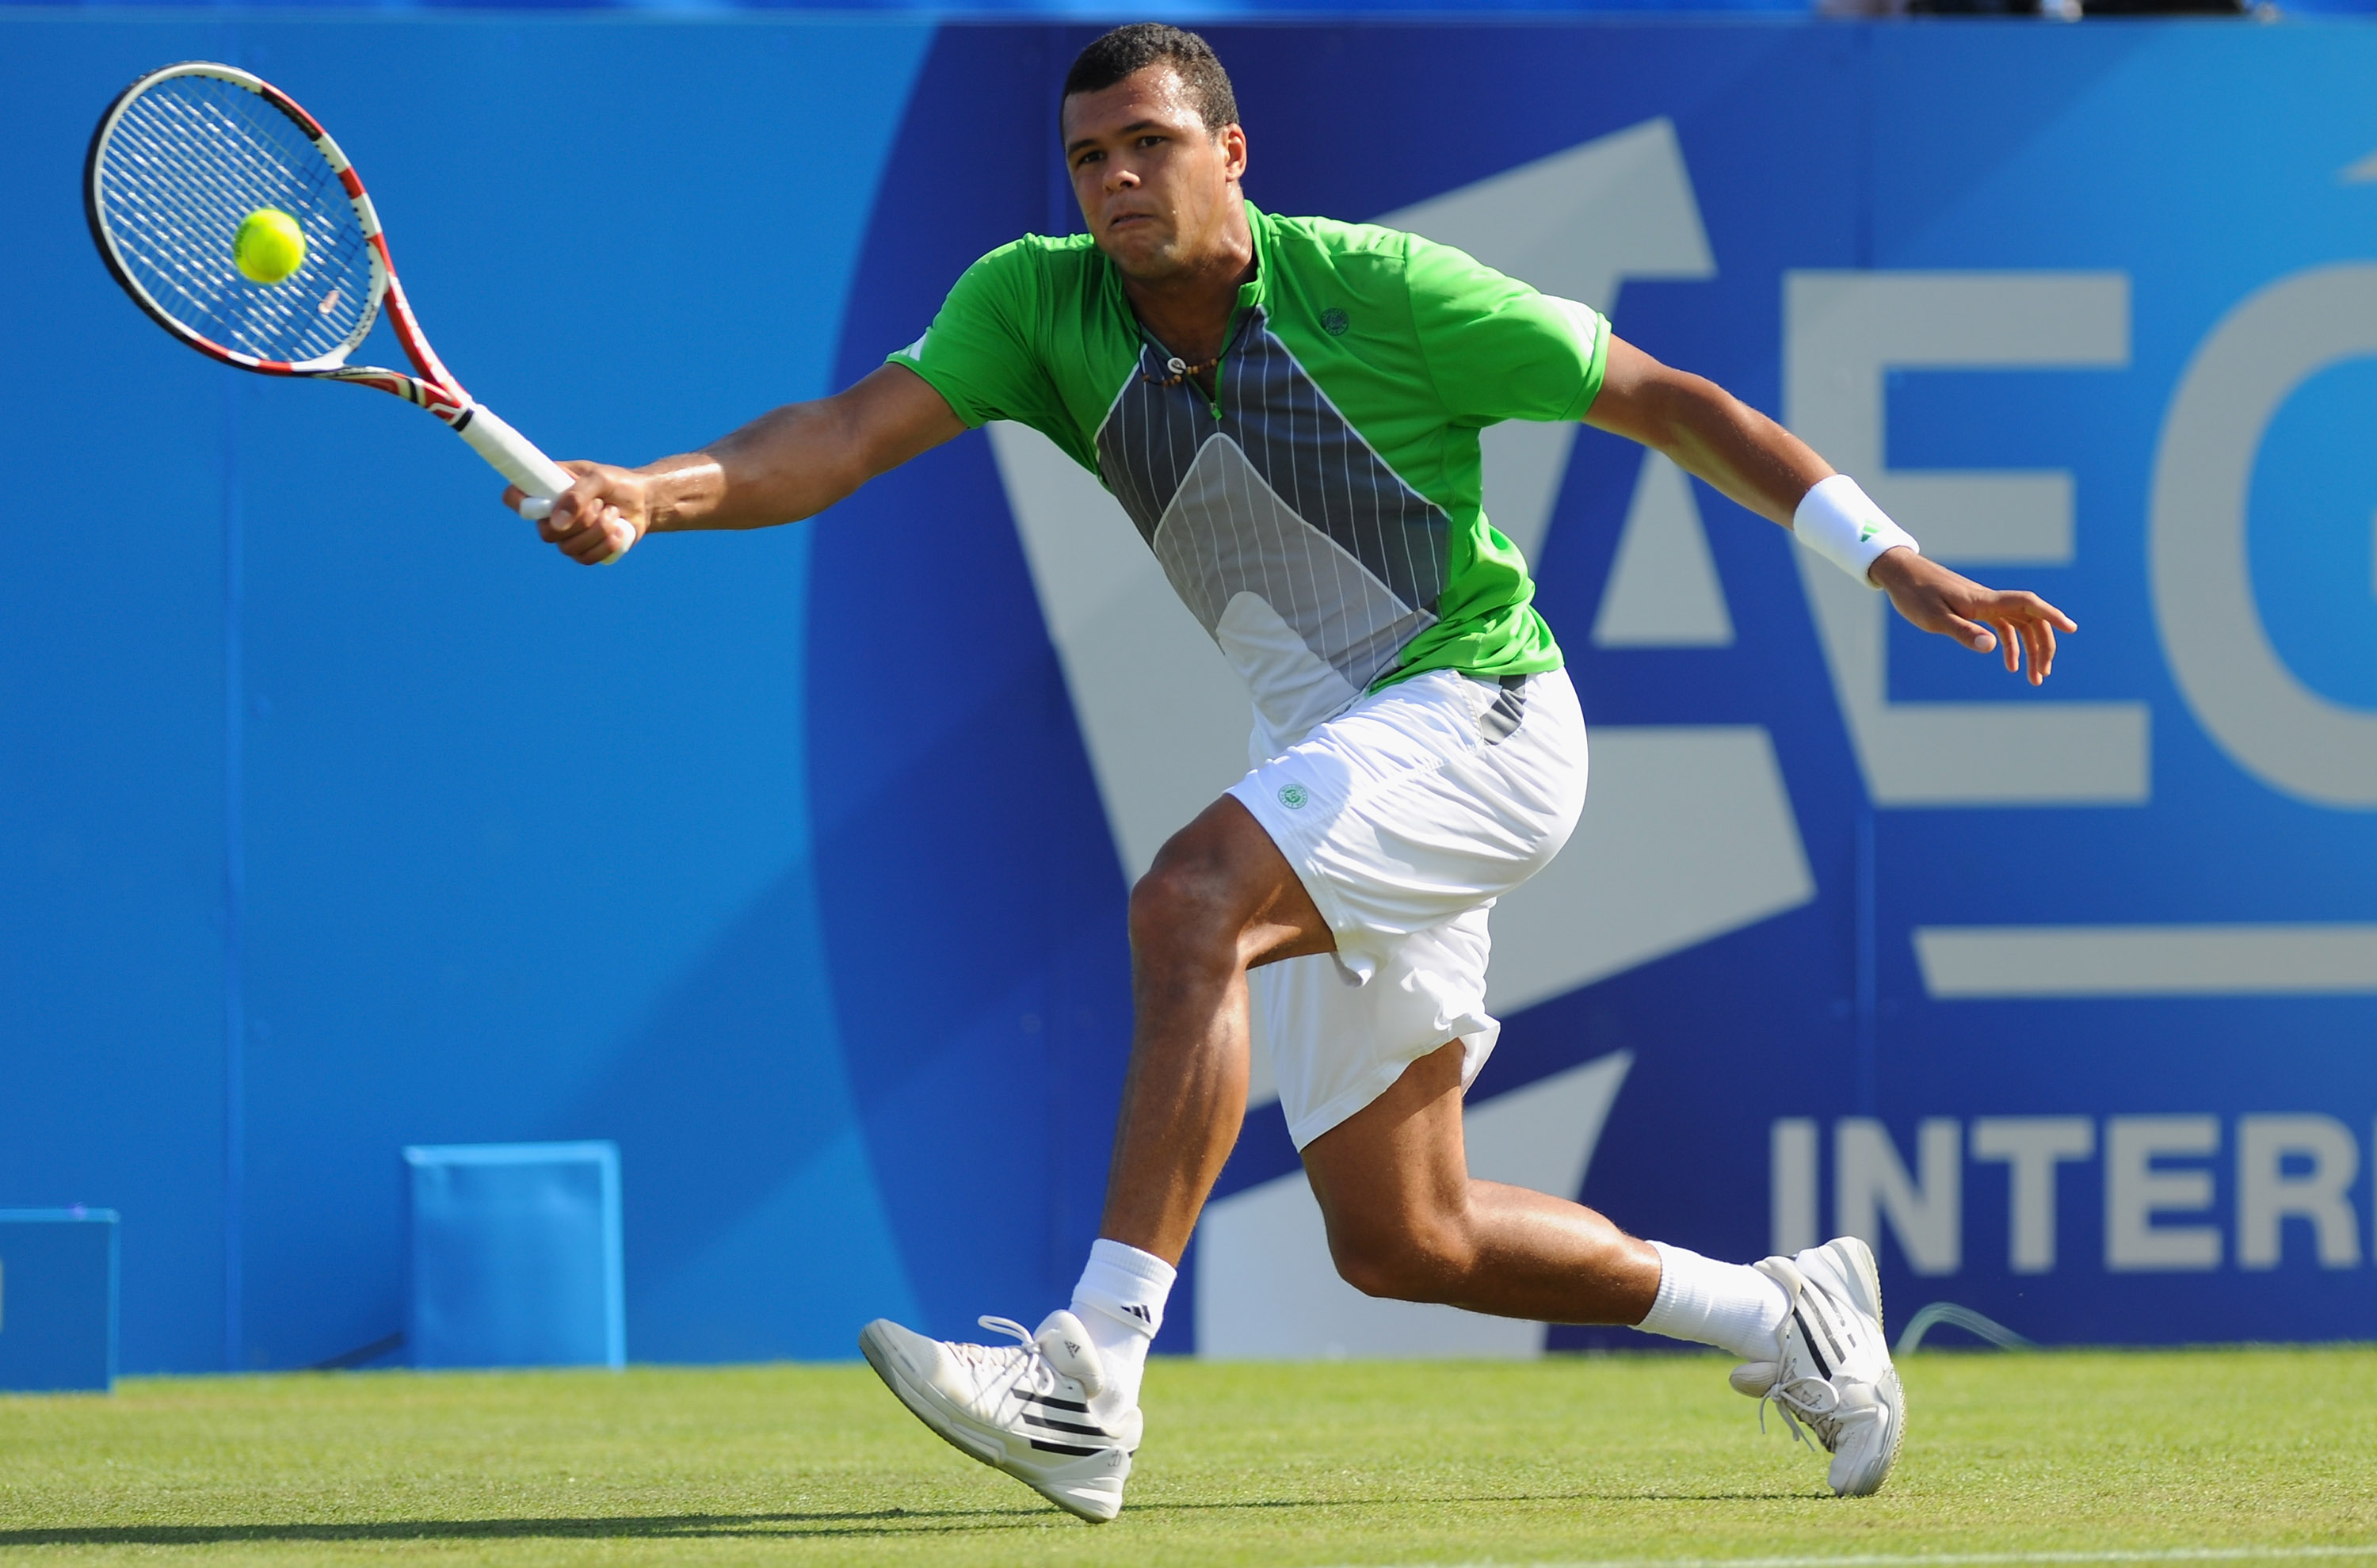 EASTBOURNE, ENGLAND - JUNE 14:  Jo-Wilfred Tsonga of France in action against Denis Istomin of Uzbekistan during day four of the AEGON International at Devonshire Park on June 14, 2011 in Eastbourne, England.  (Photo by Mike Hewitt/Getty Images)